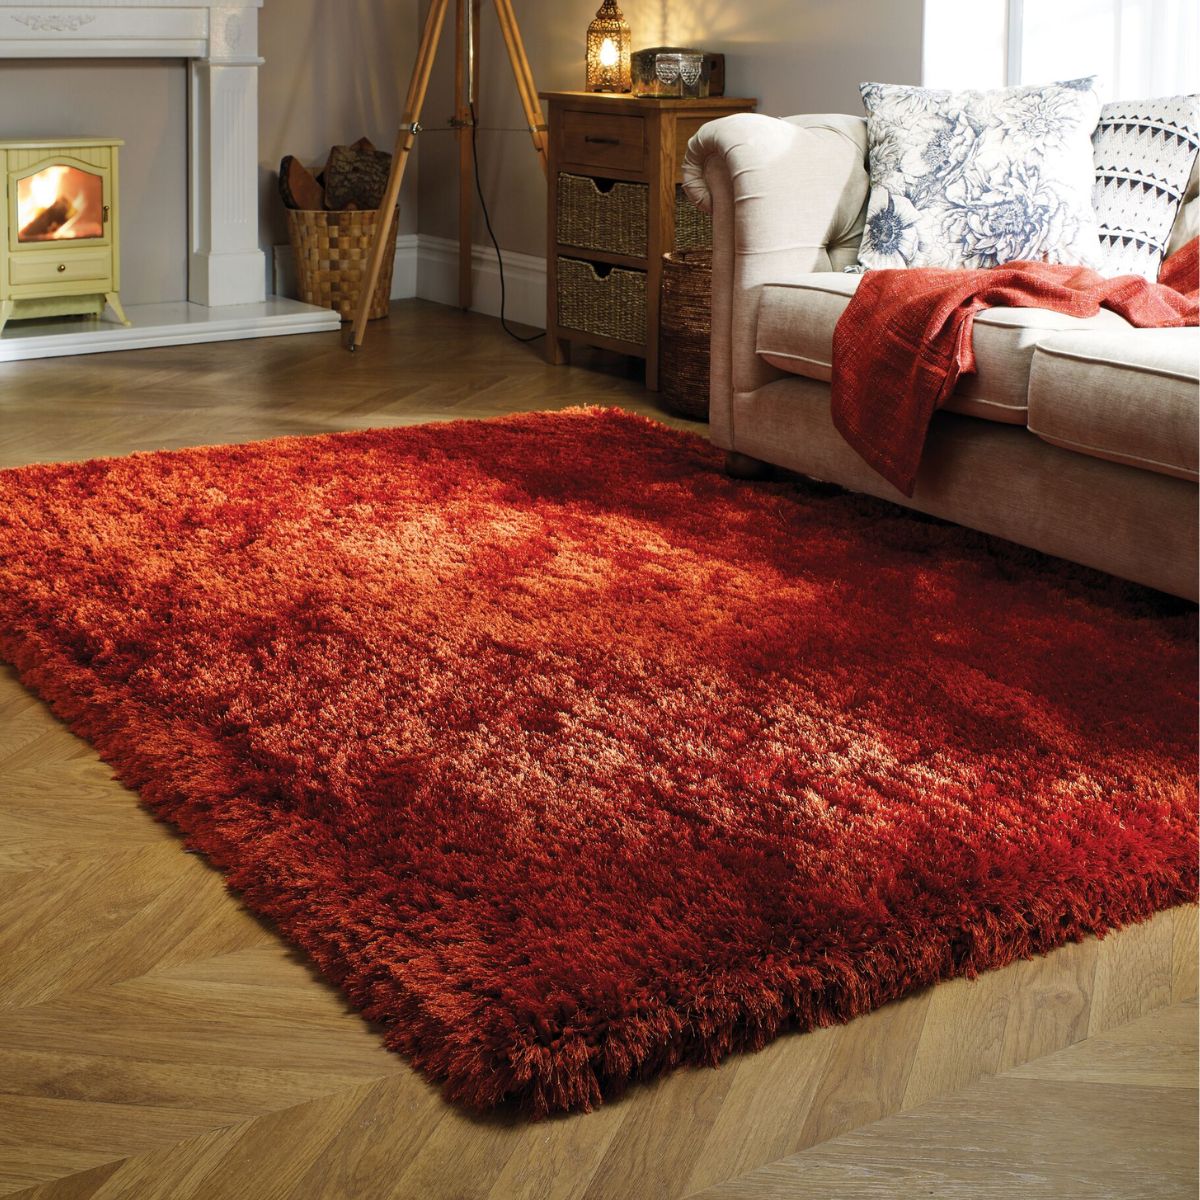 Tapis shaggy Pearl rouille 120x170cm